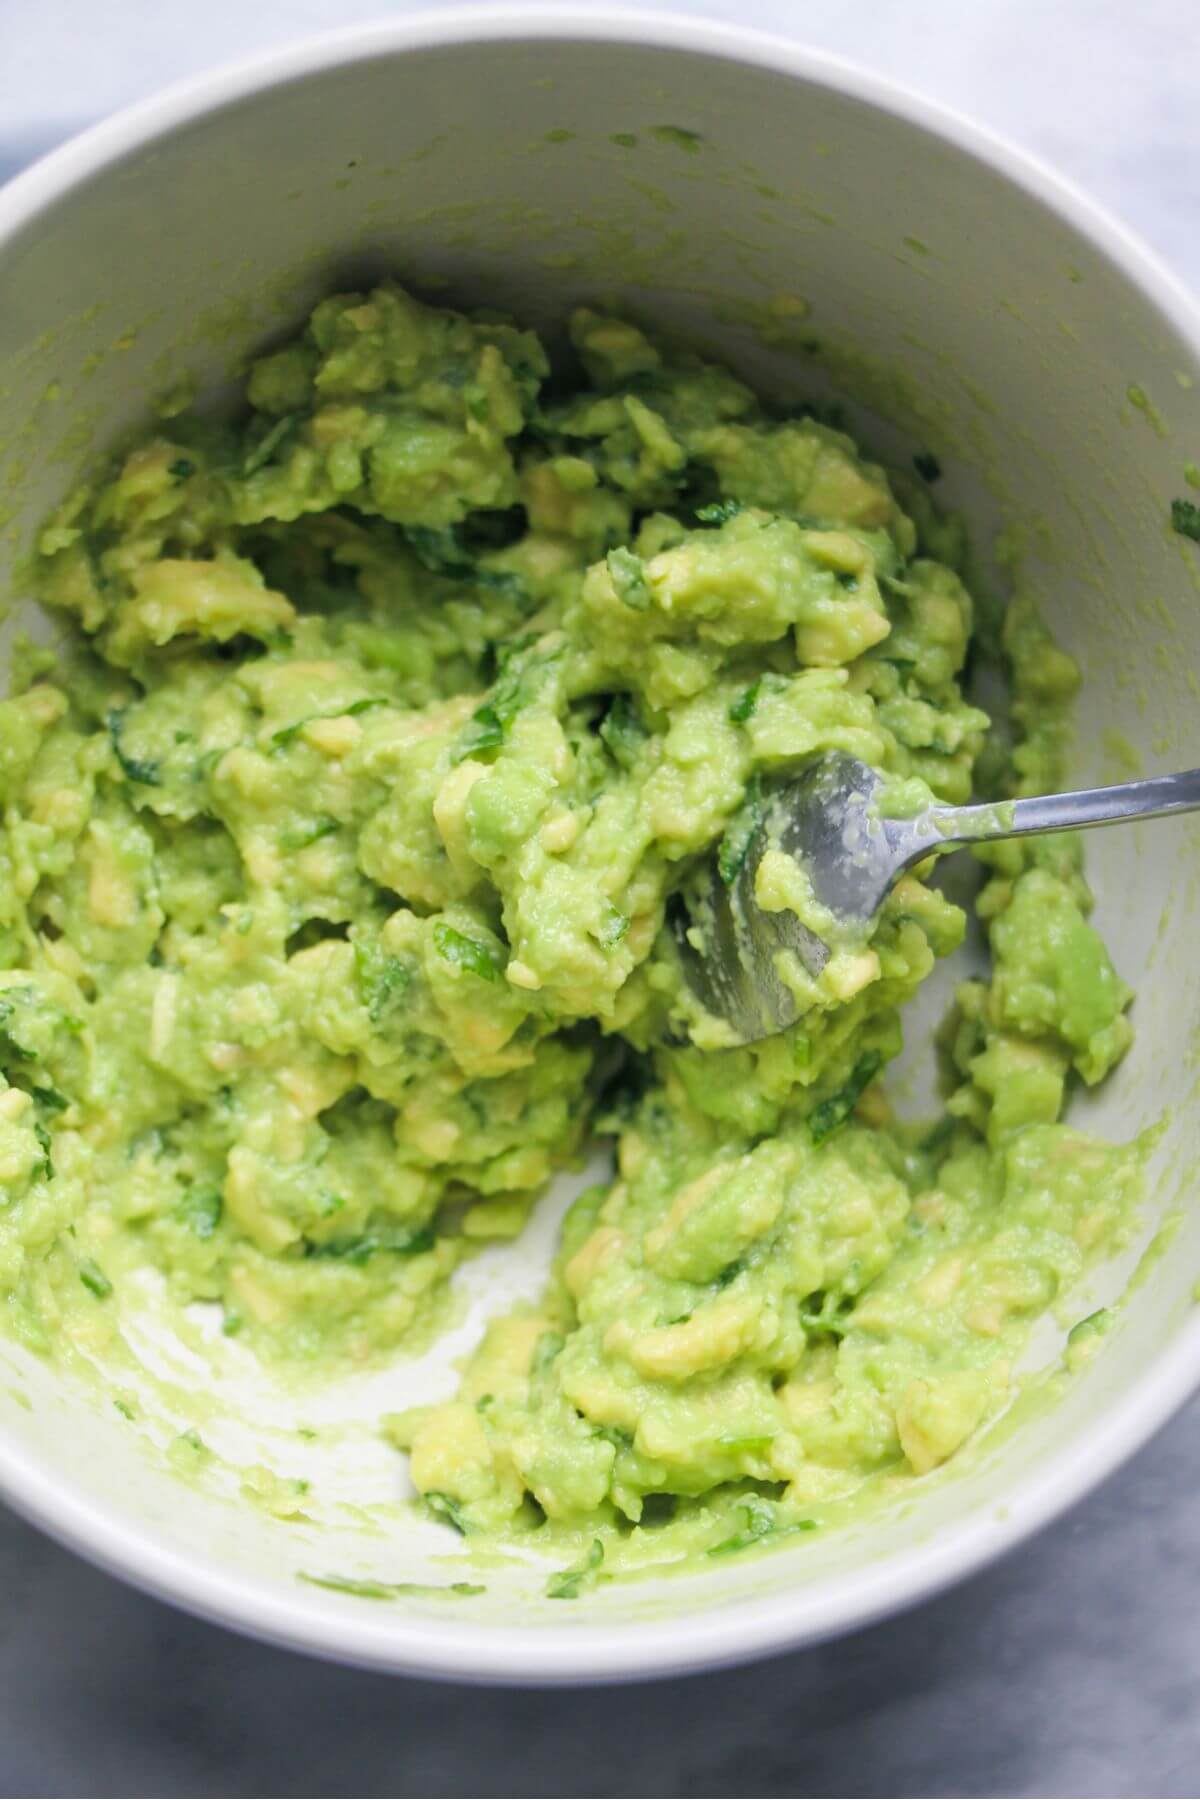 Small silver spoon mixing green avocado into a smooth mash in a small white bowl.